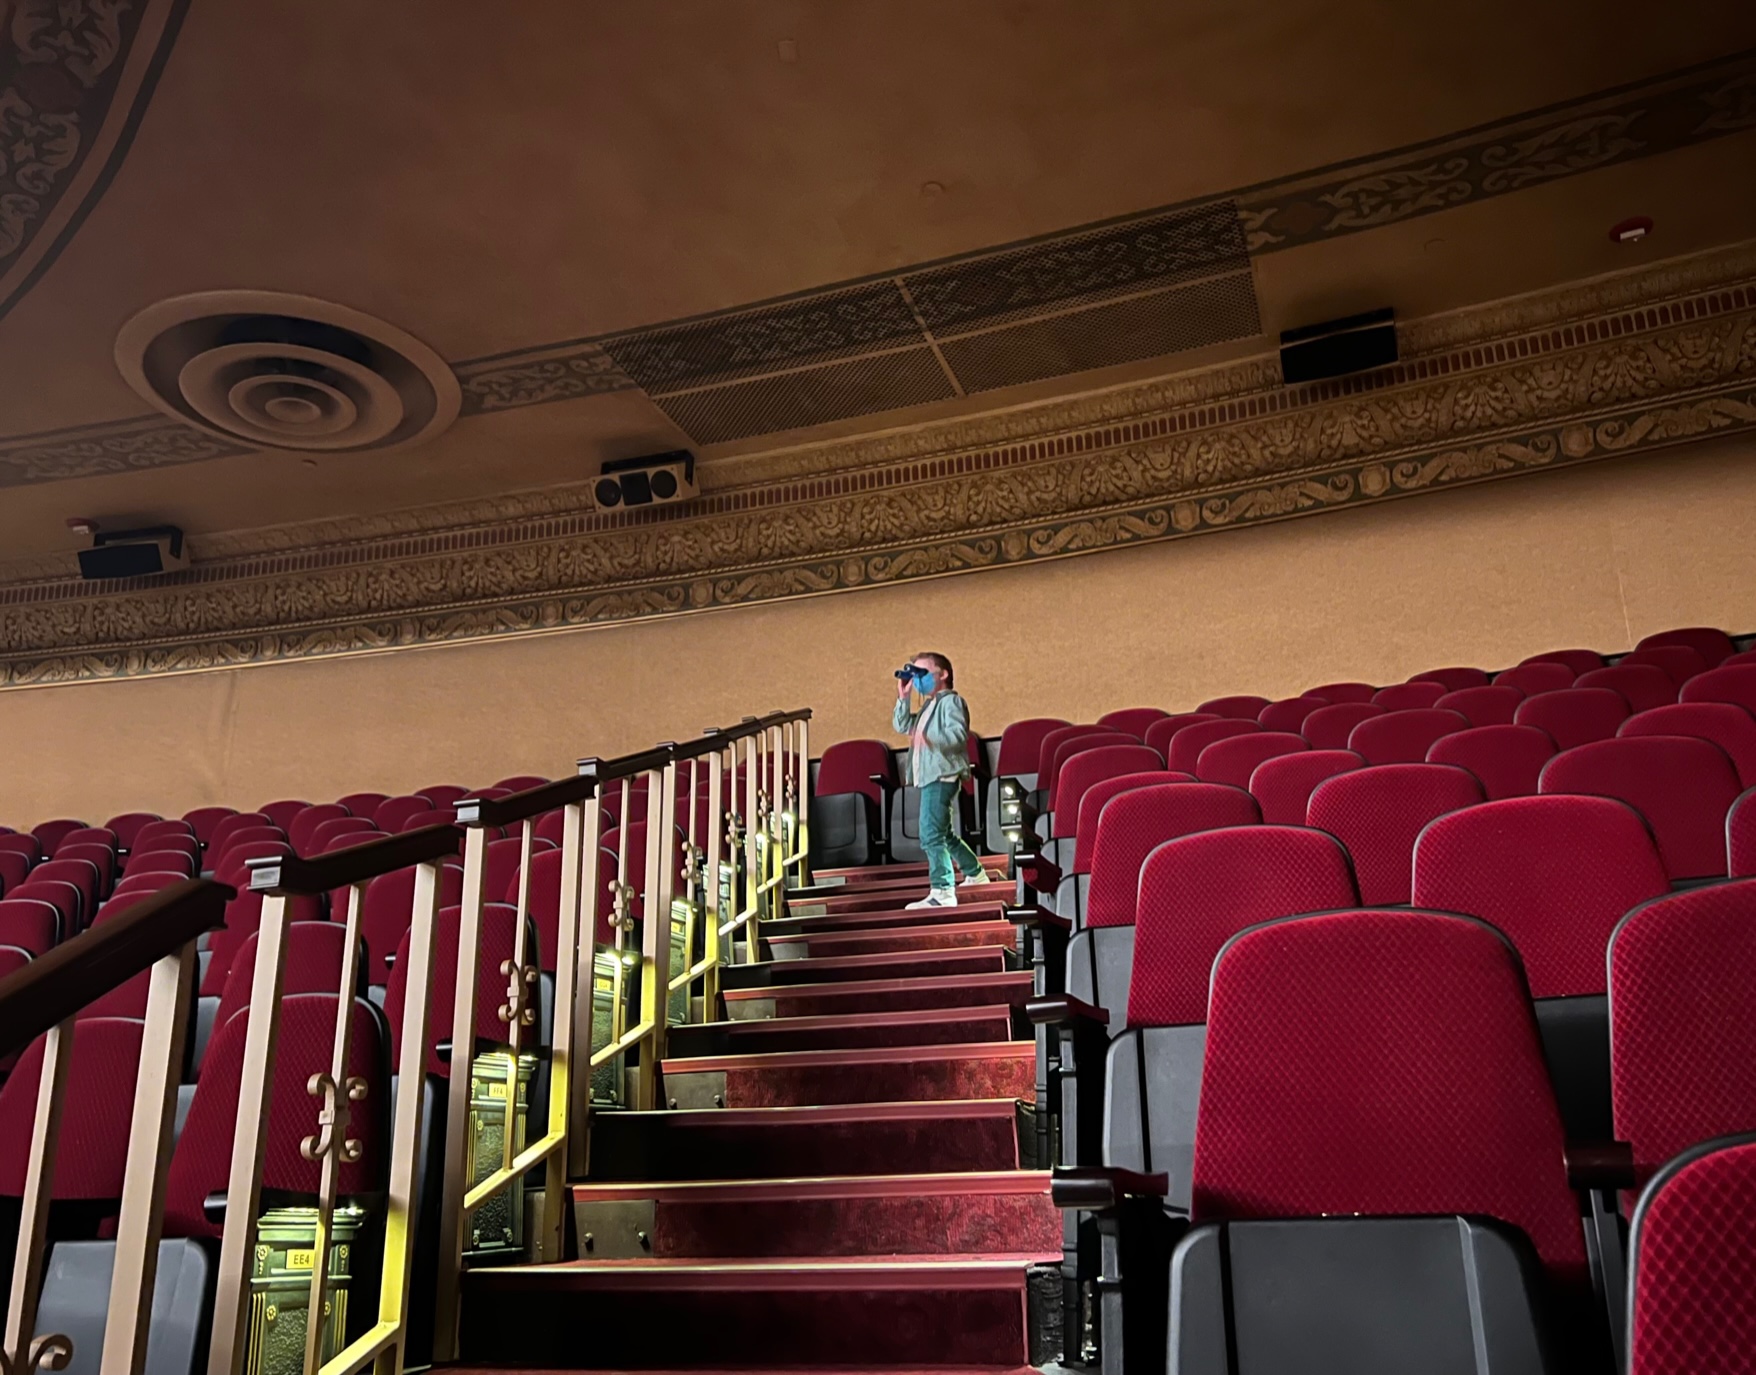 In the Virginia Theatre, a small child holds binoculars to his eyes to see the stage from the back row. Photo by Alyssa Buckley.